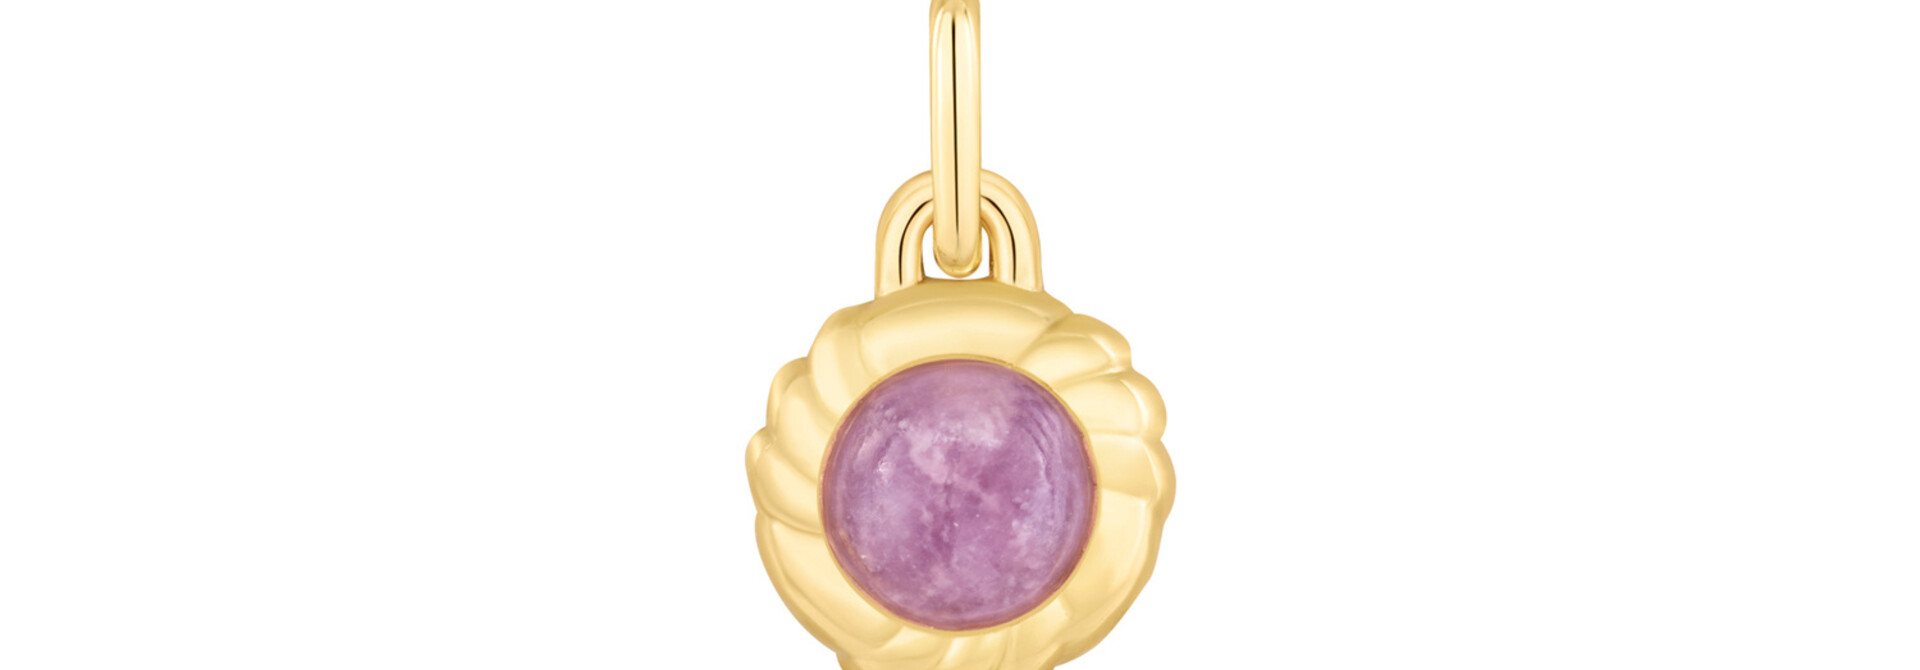 Marble Charm - Gold Plated